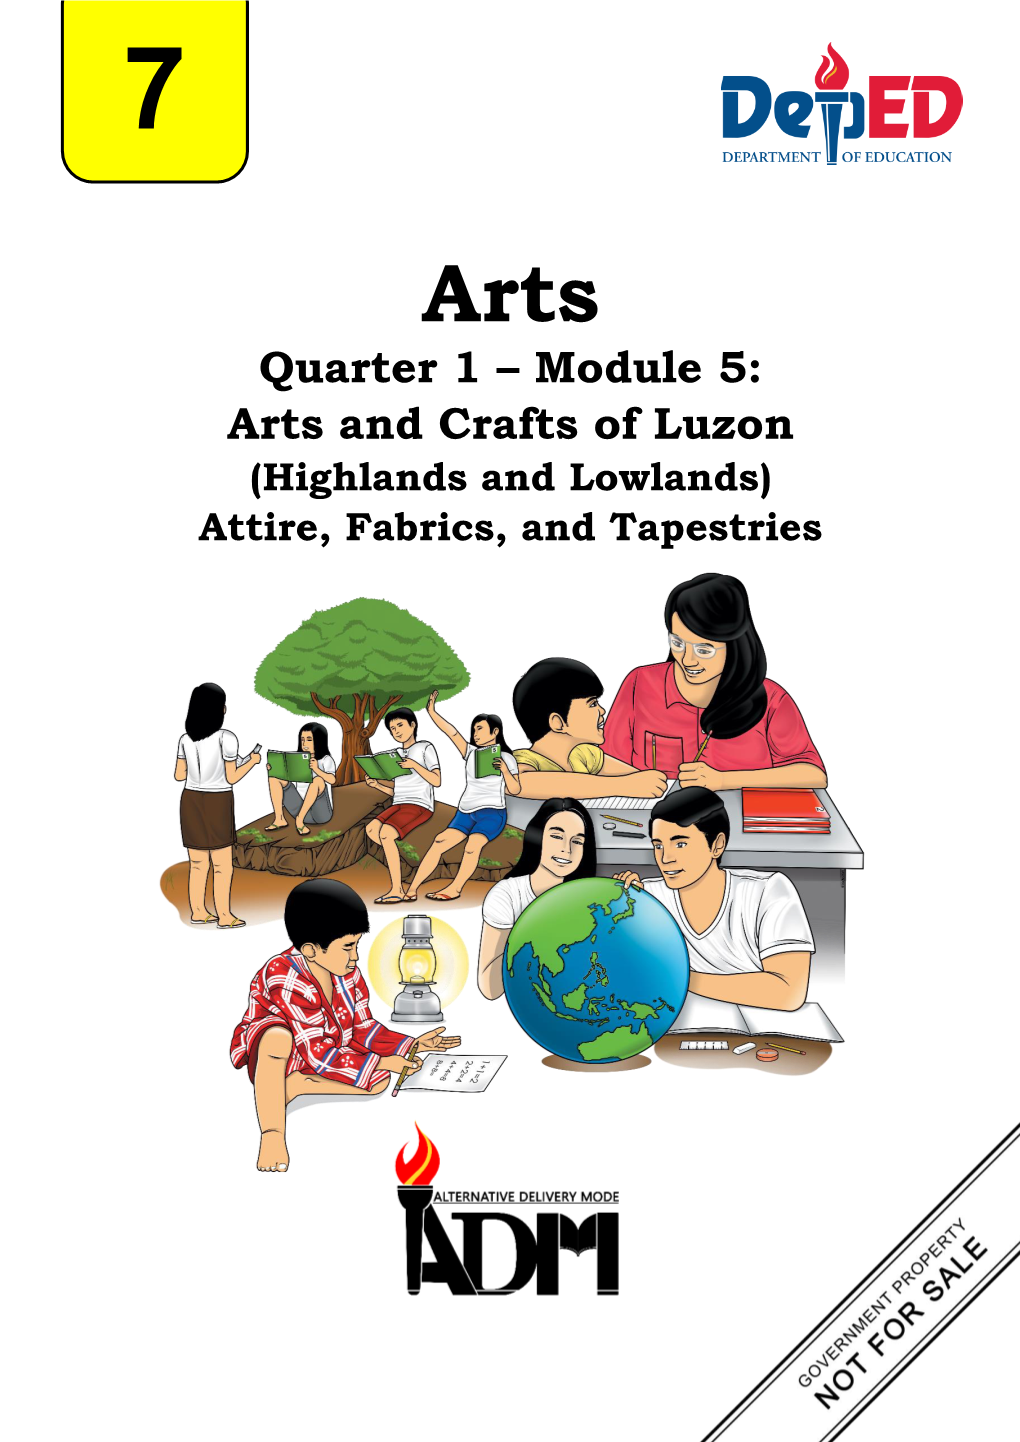 Quarter 1 – Module 5: Arts and Crafts of Luzon (Highlands and Lowlands) Attire, Fabrics, and Tapestries